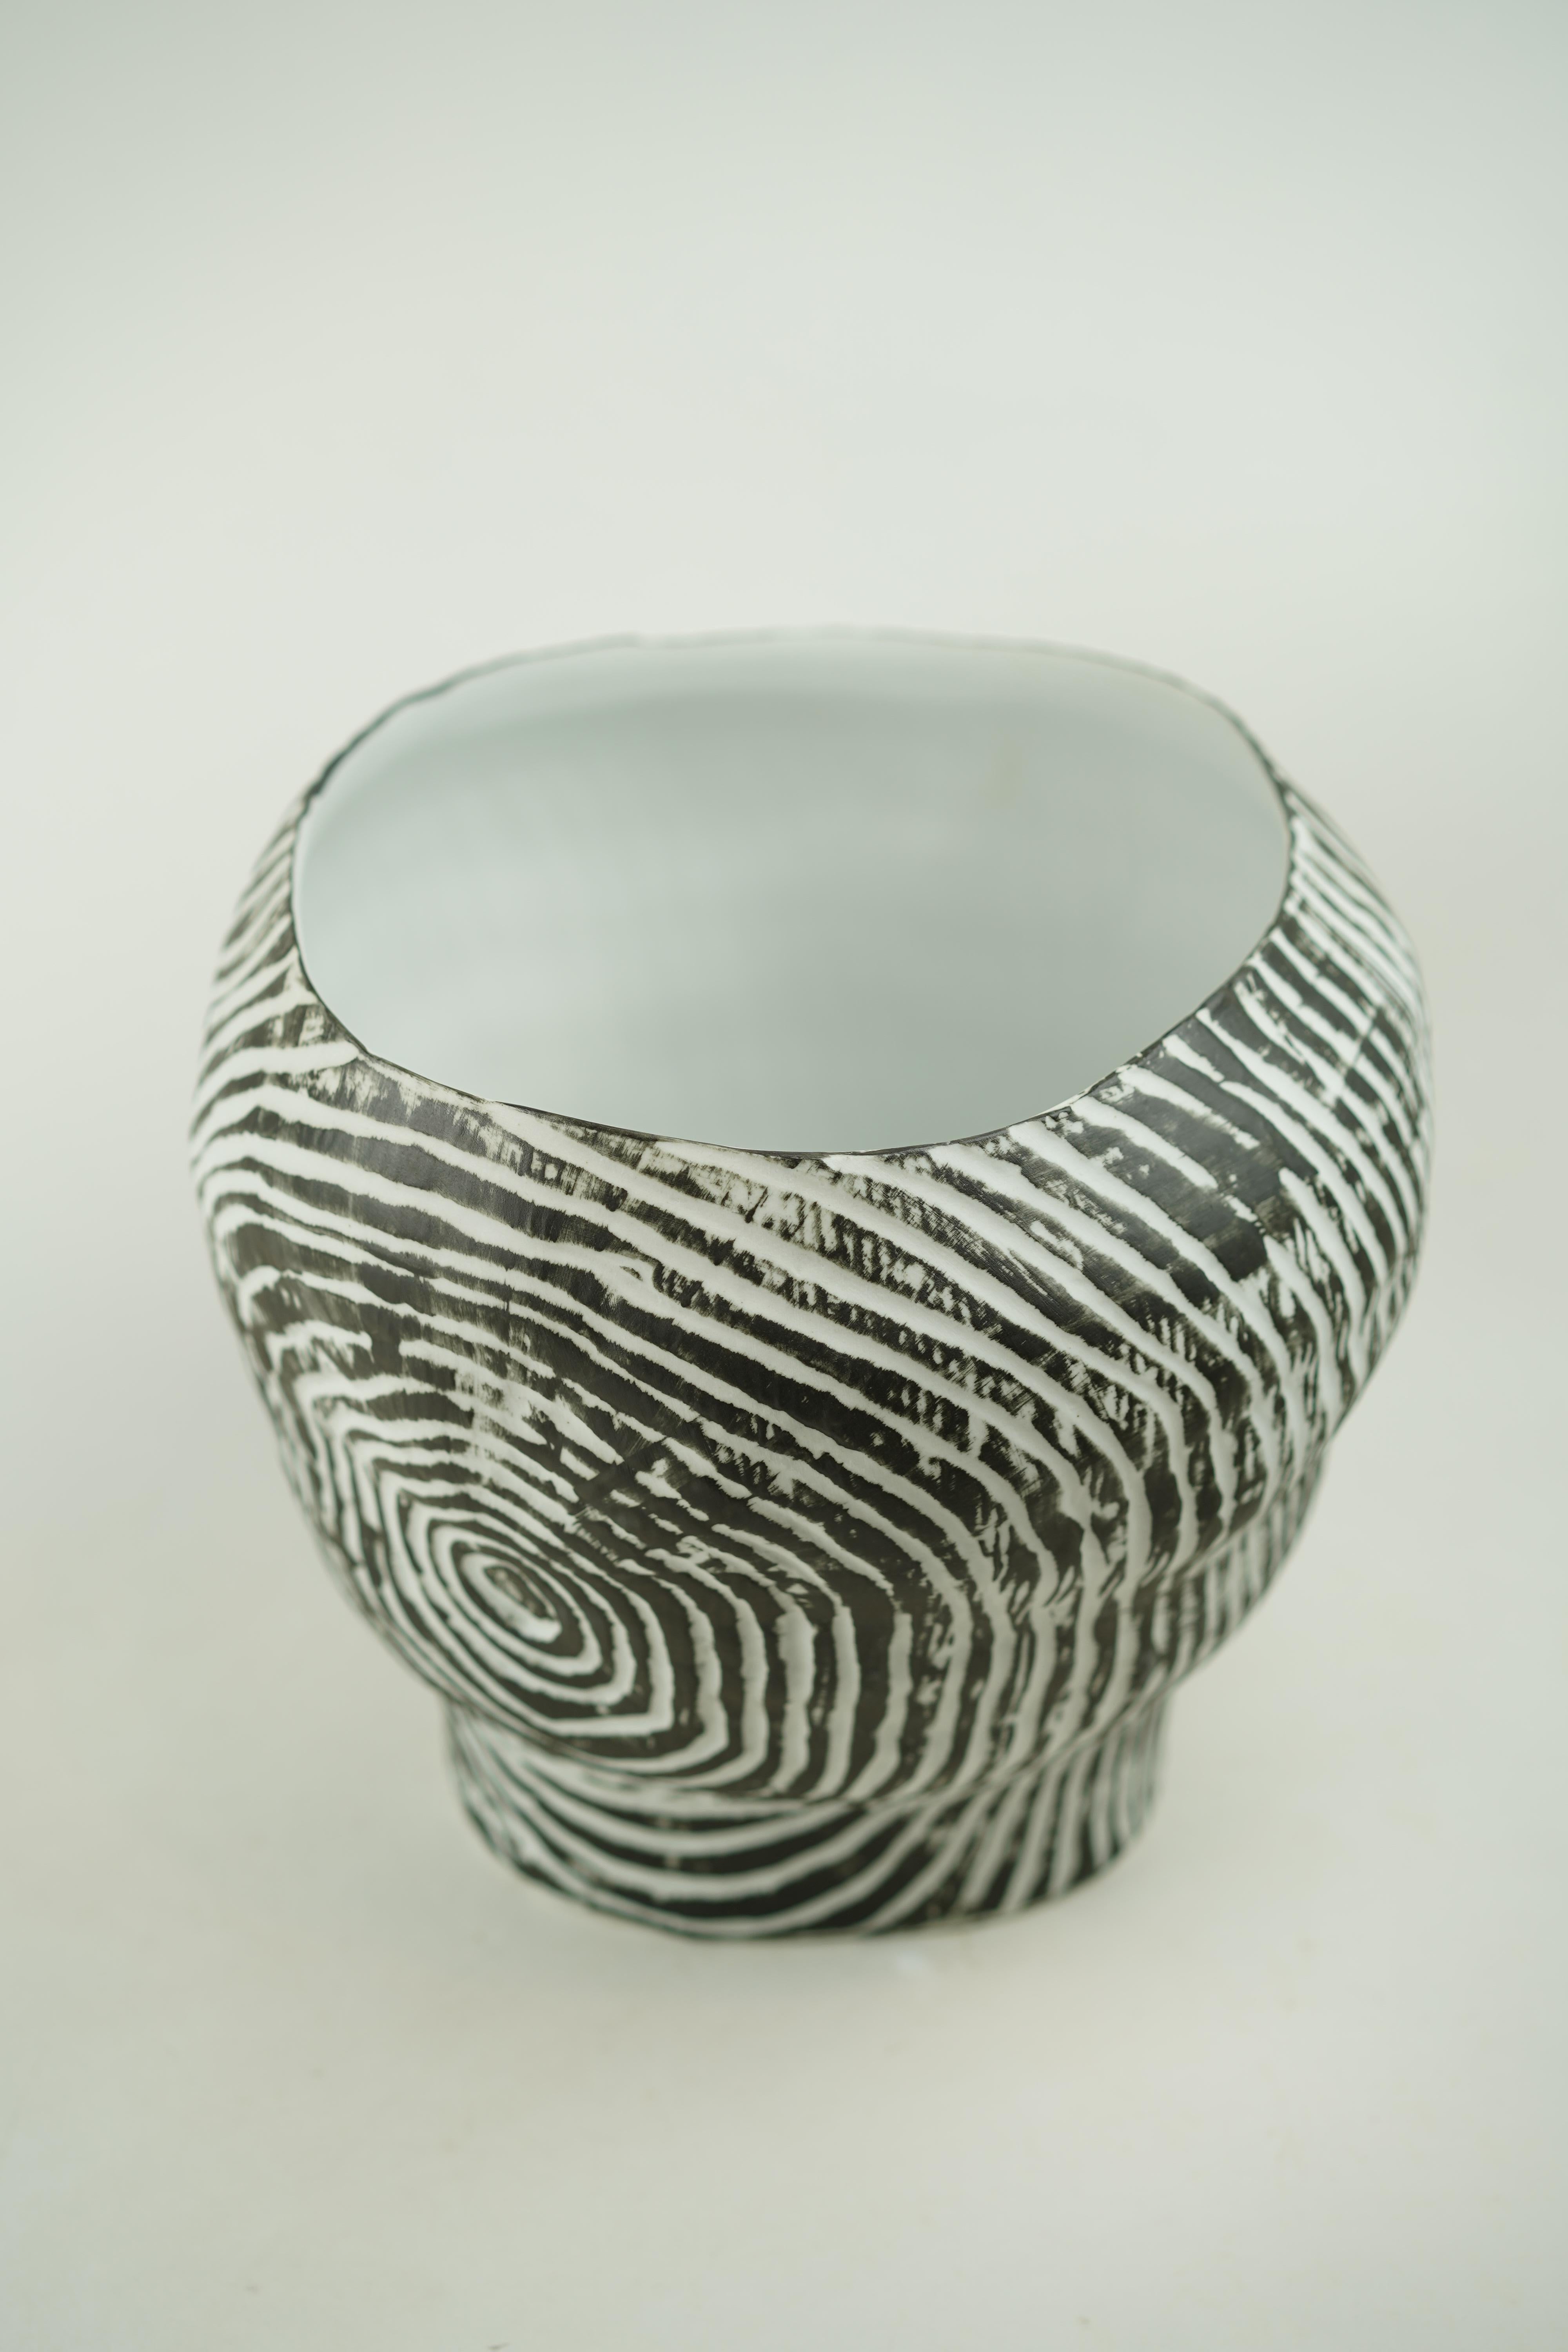 Wabi Sabi Awakening Spiral Vase, Available in Blue or Black In New Condition For Sale In London, GB